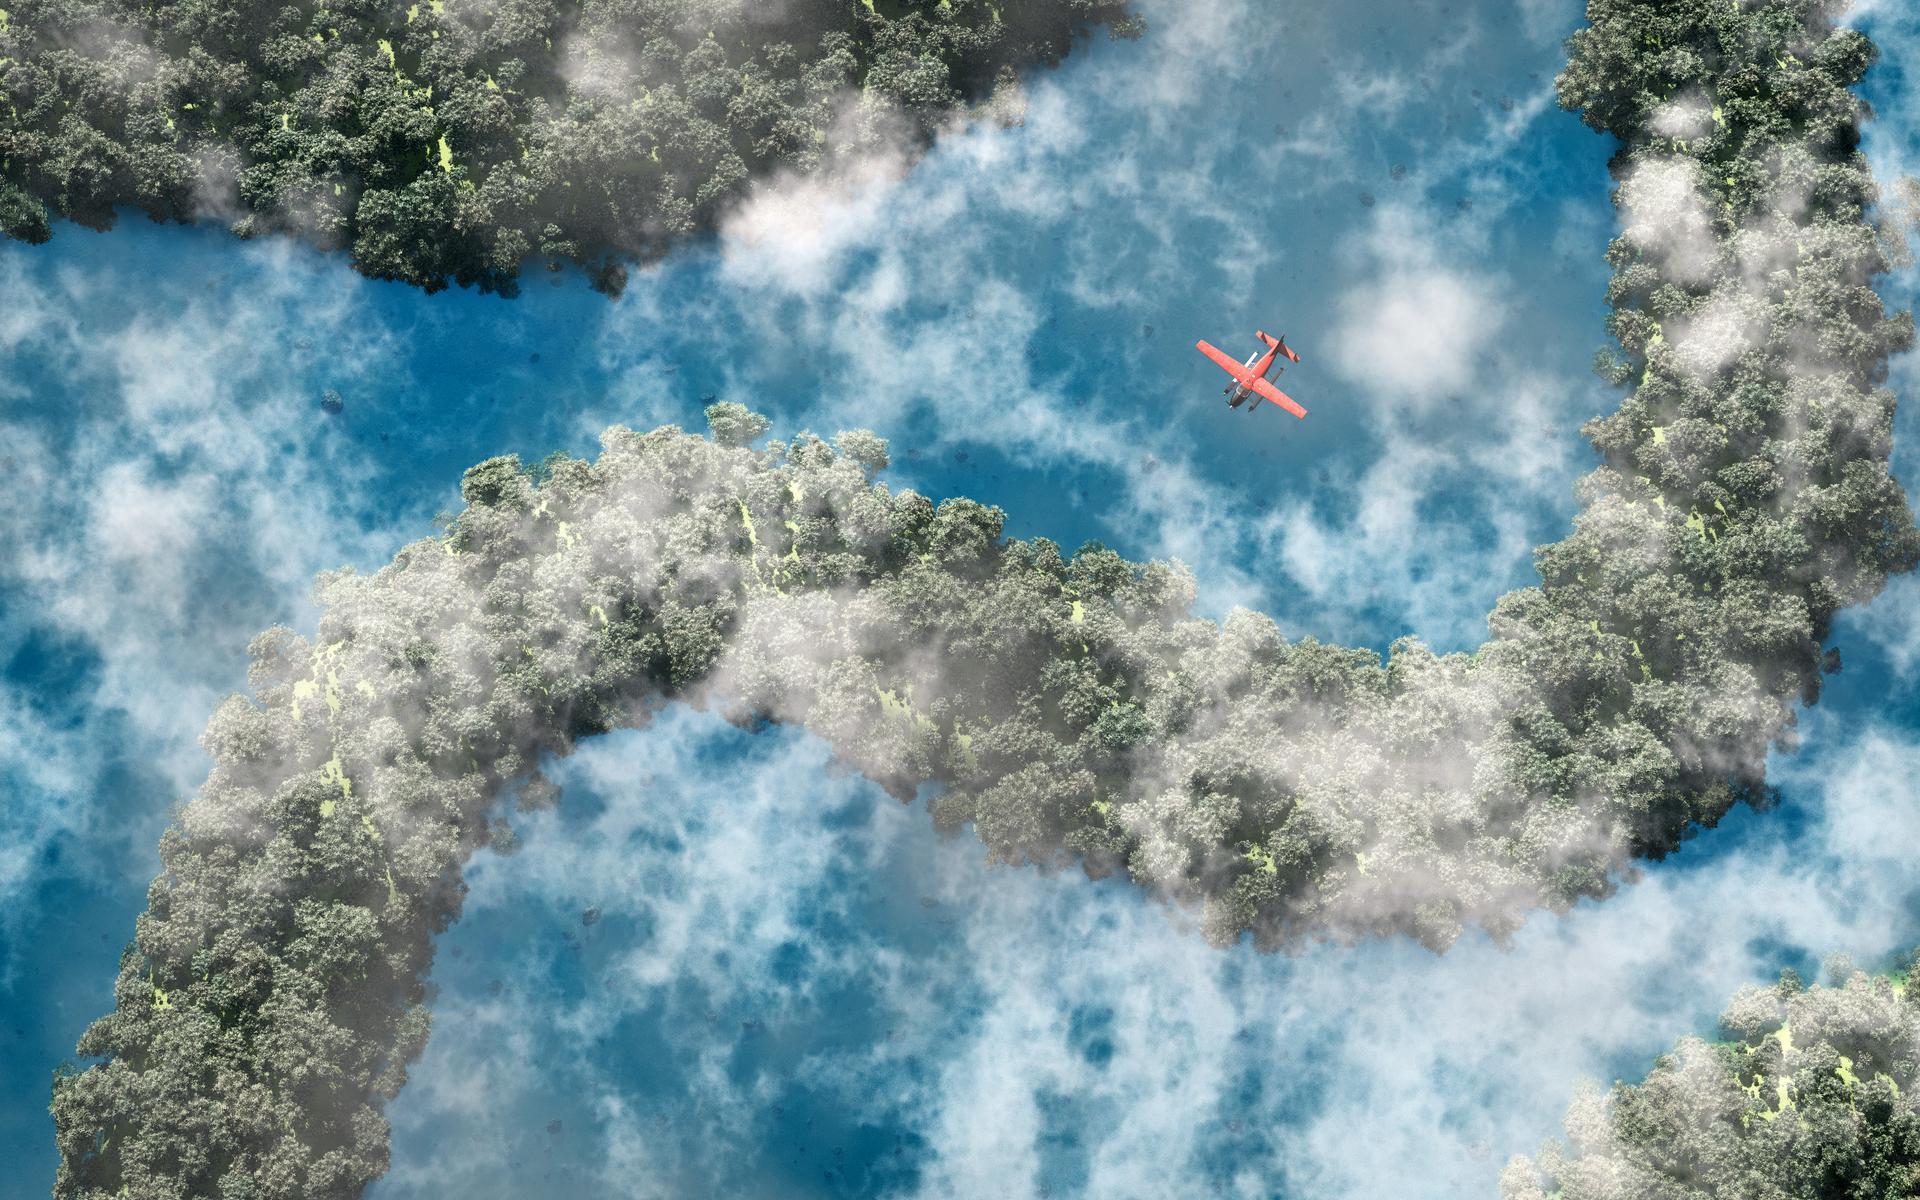 A plane soaring above a serene river and lush trees, showcasing the beauty of nature from above.